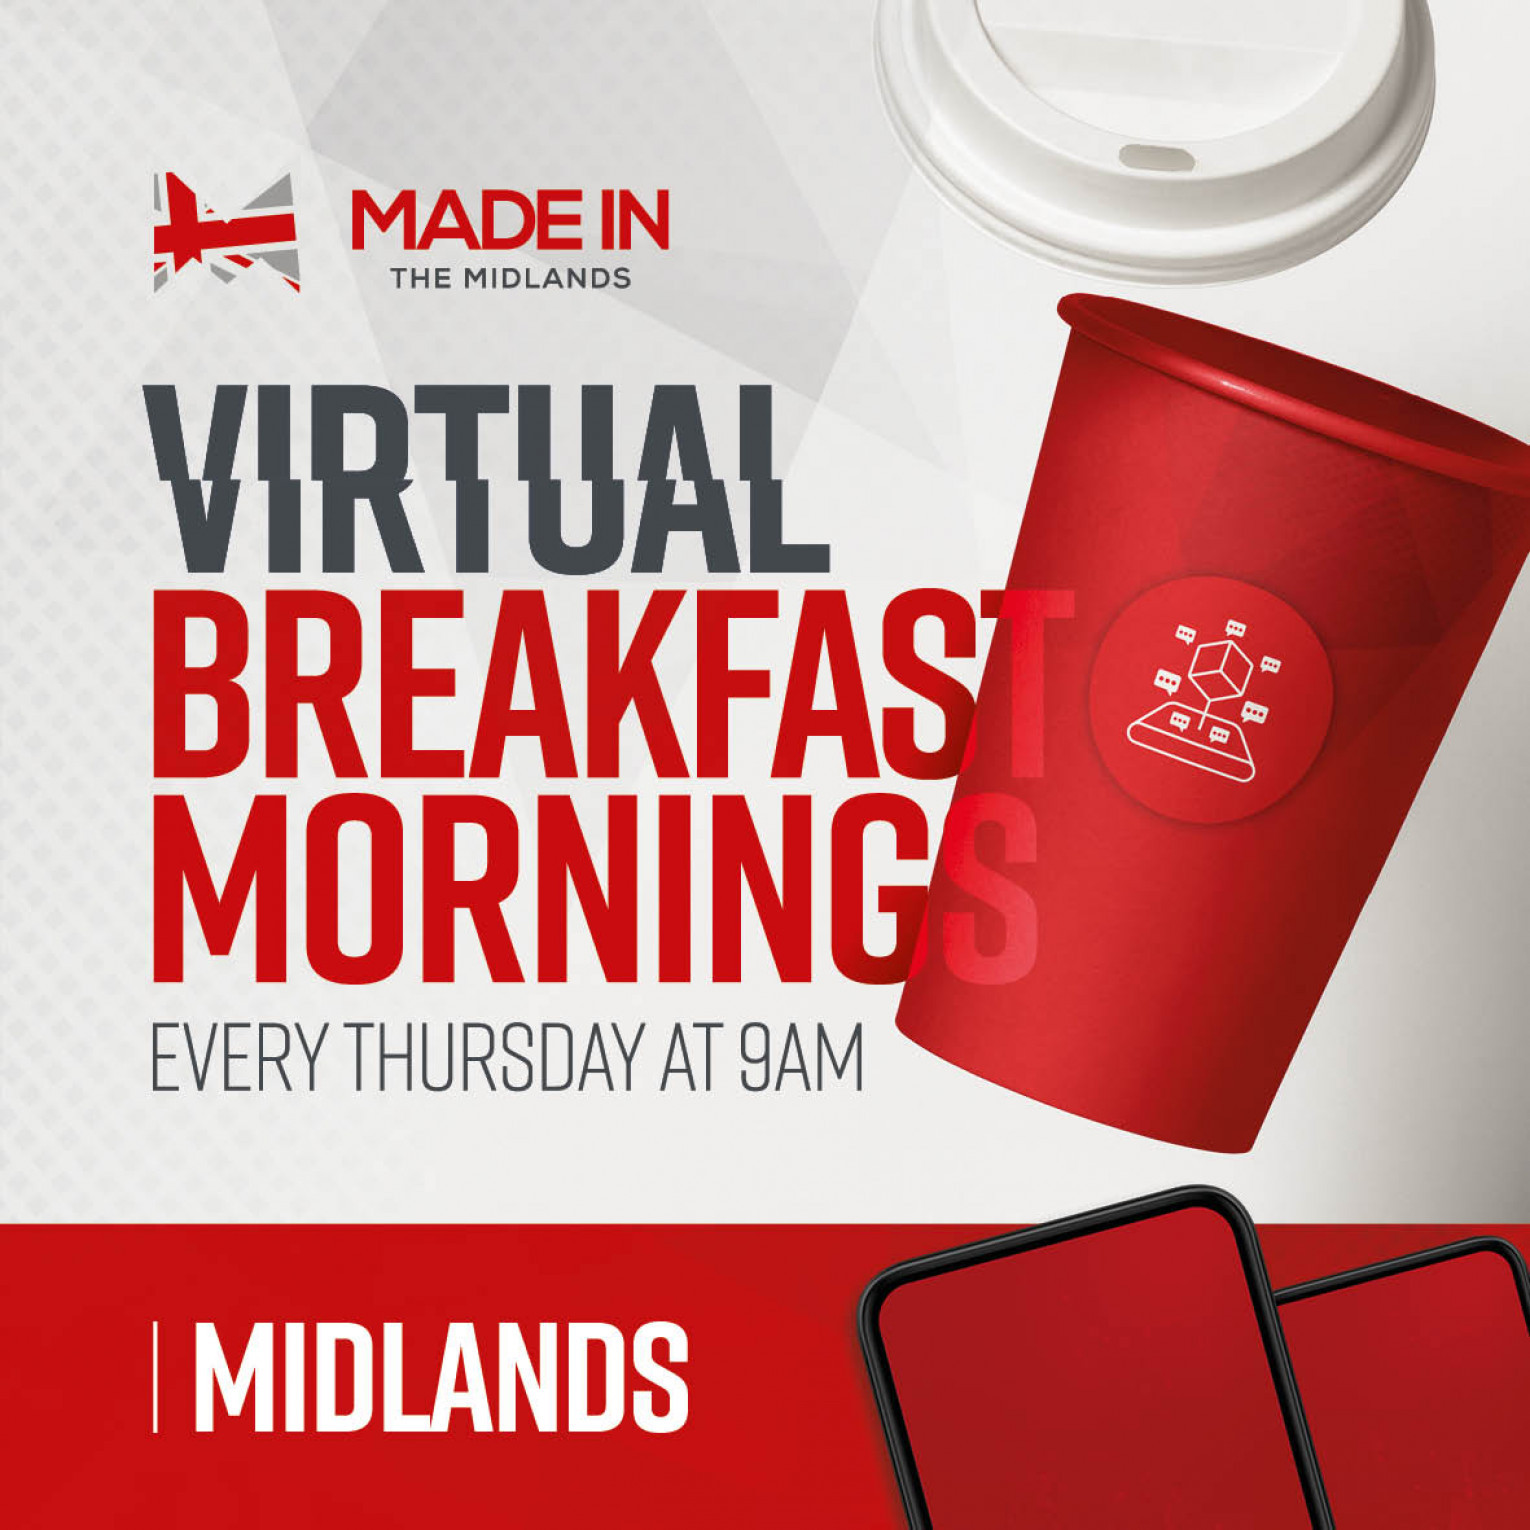 Made in the Midlands Virtual Breakfast Morning with Citizen Machinery